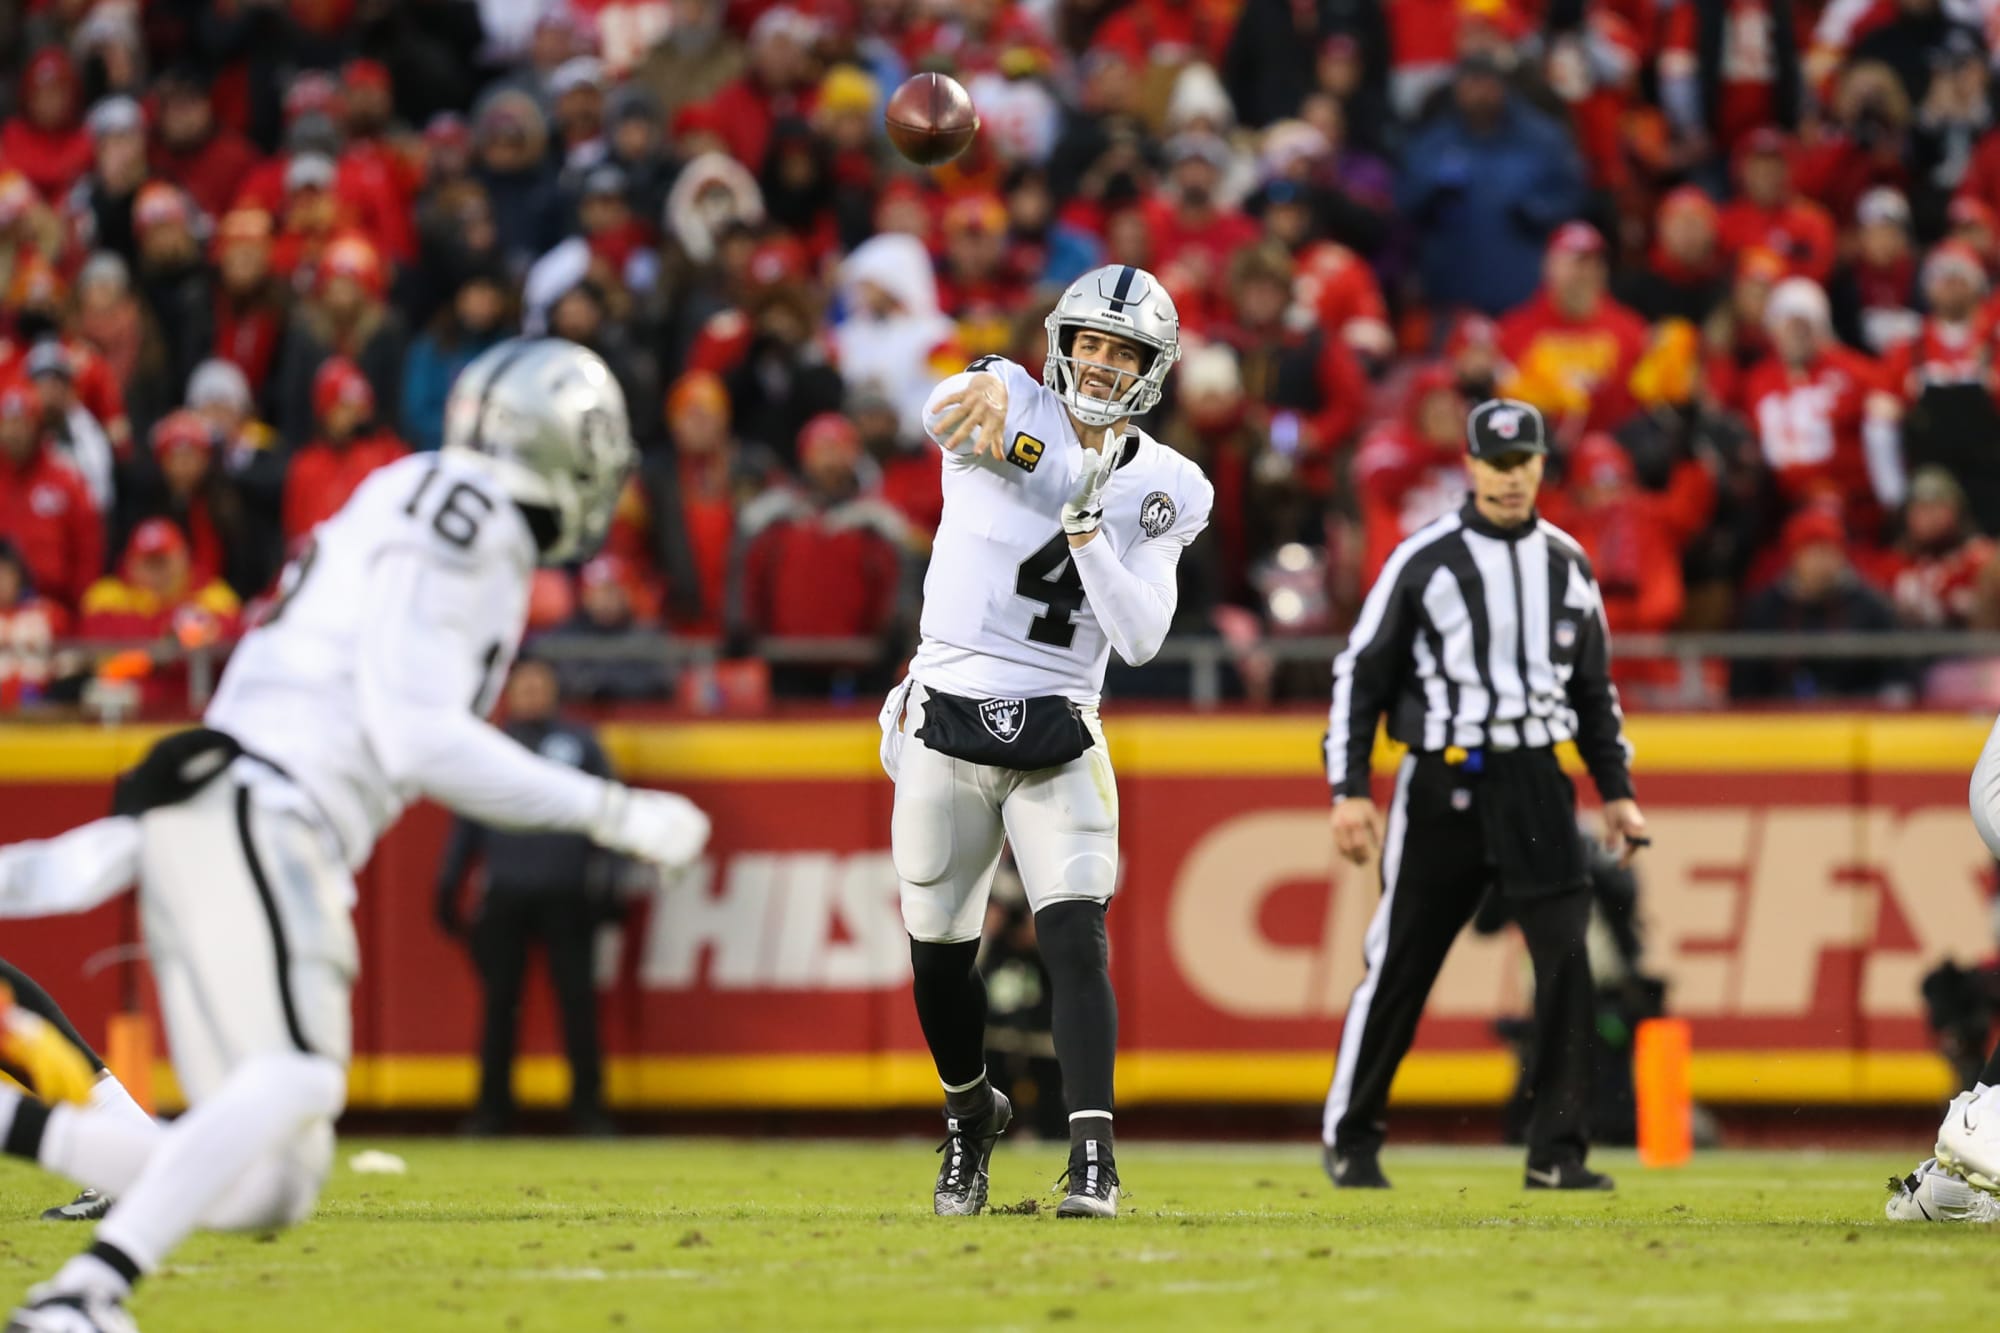 The difficulty in evaluating Derek Carr's season with the Raiders